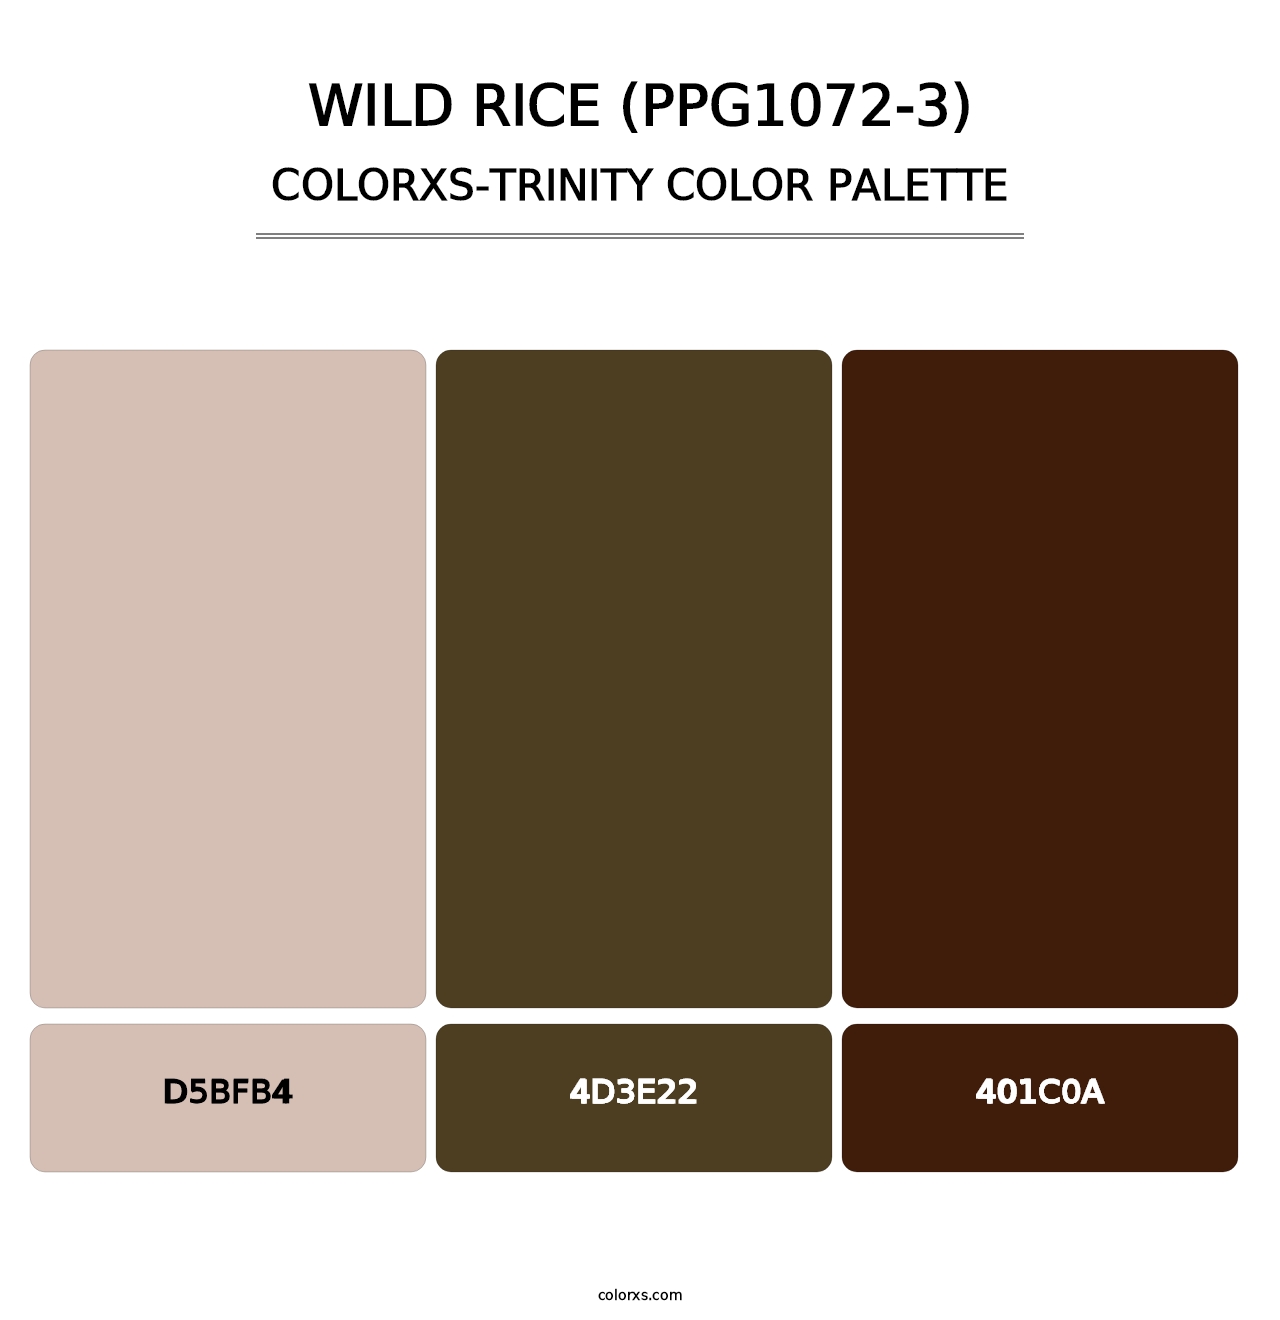 Wild Rice (PPG1072-3) - Colorxs Trinity Palette